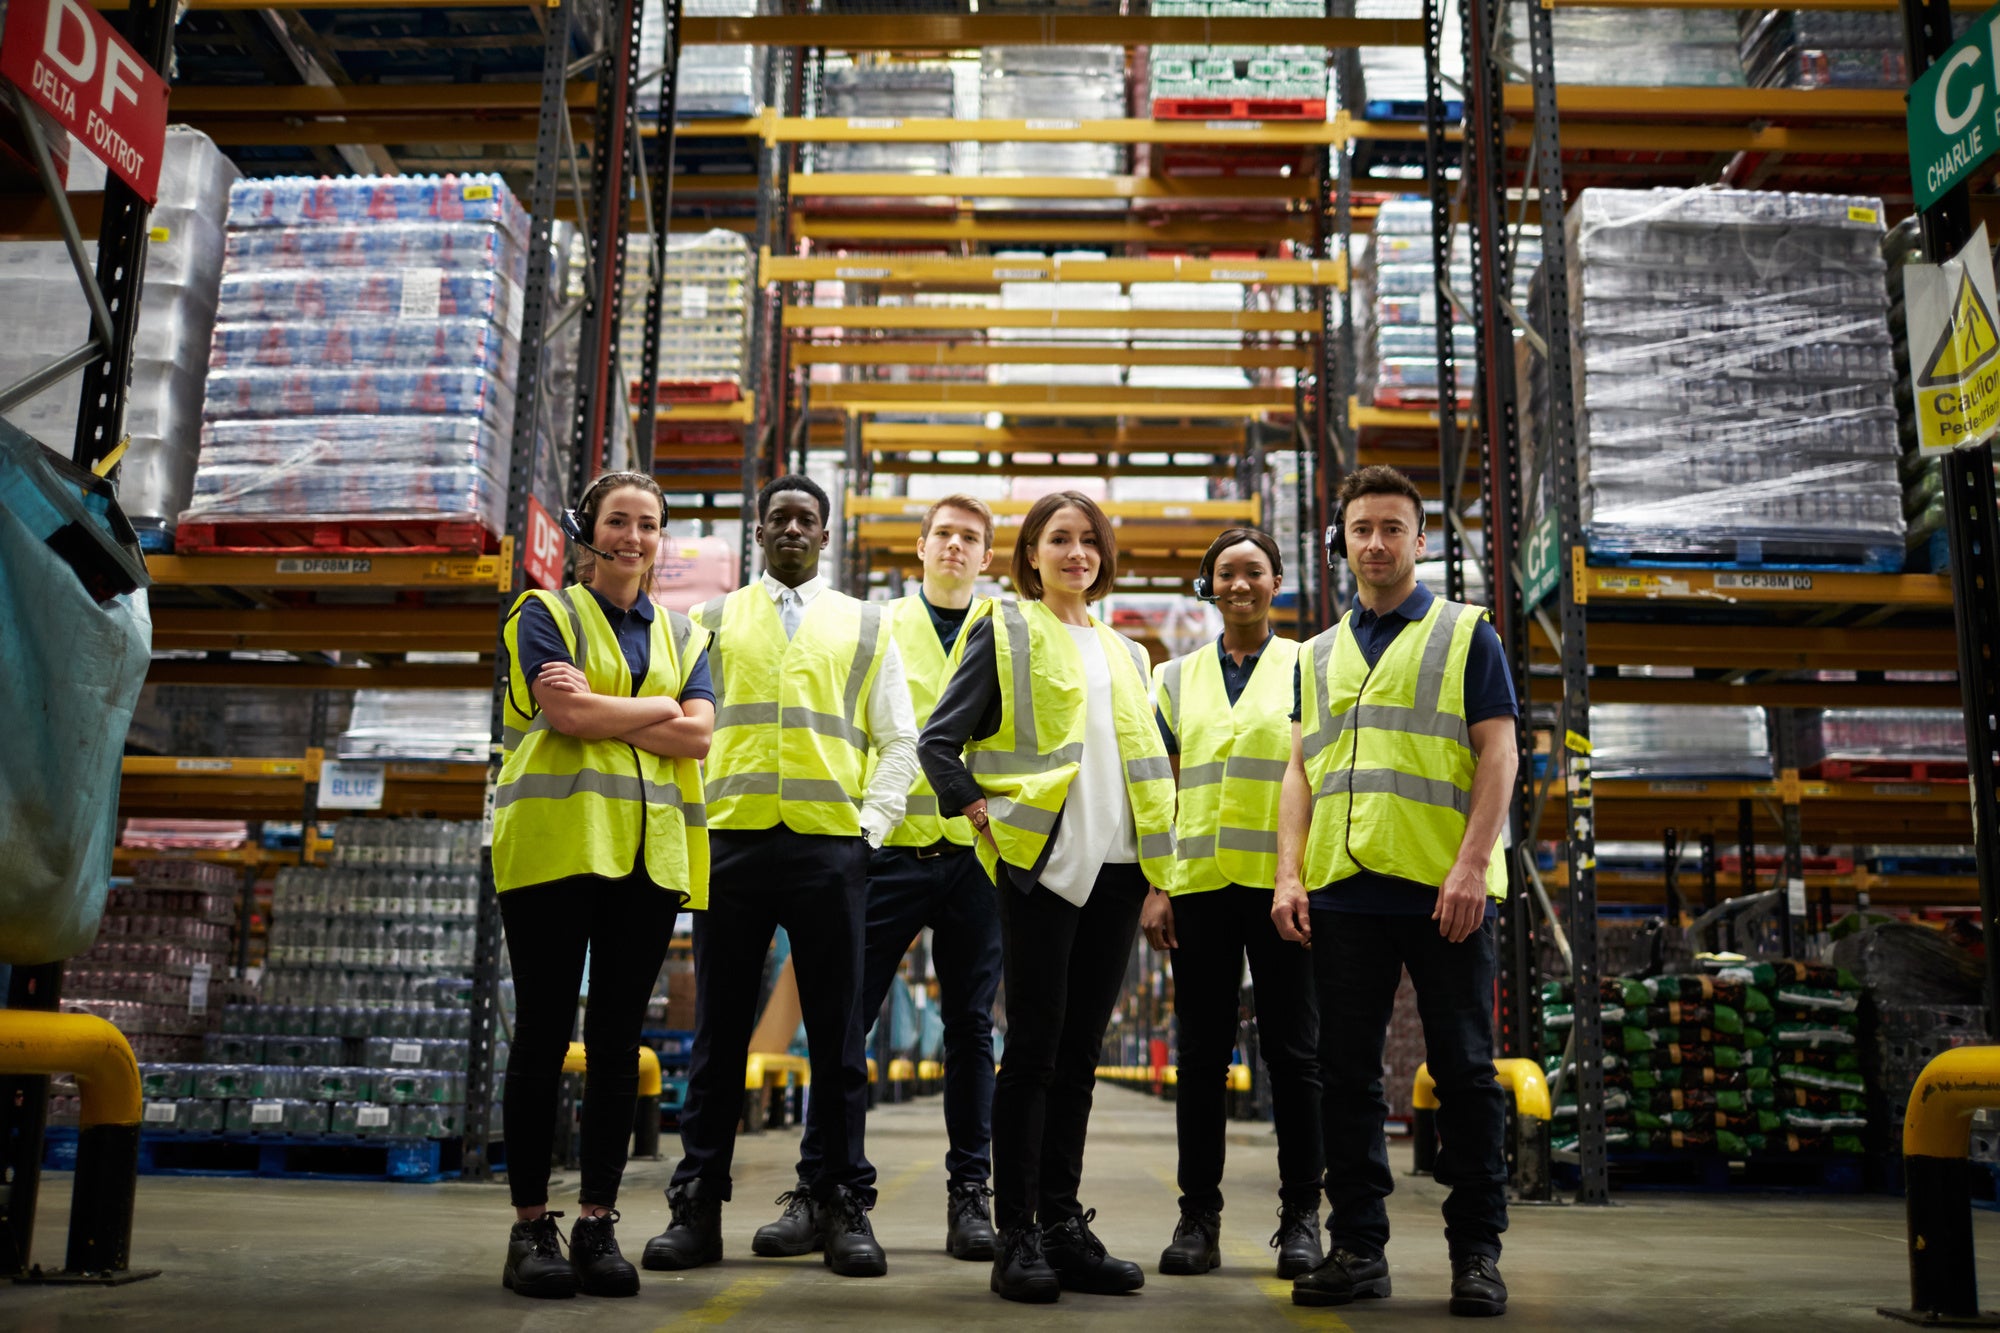 Group portrait of staff at distribution warehouse, low angle